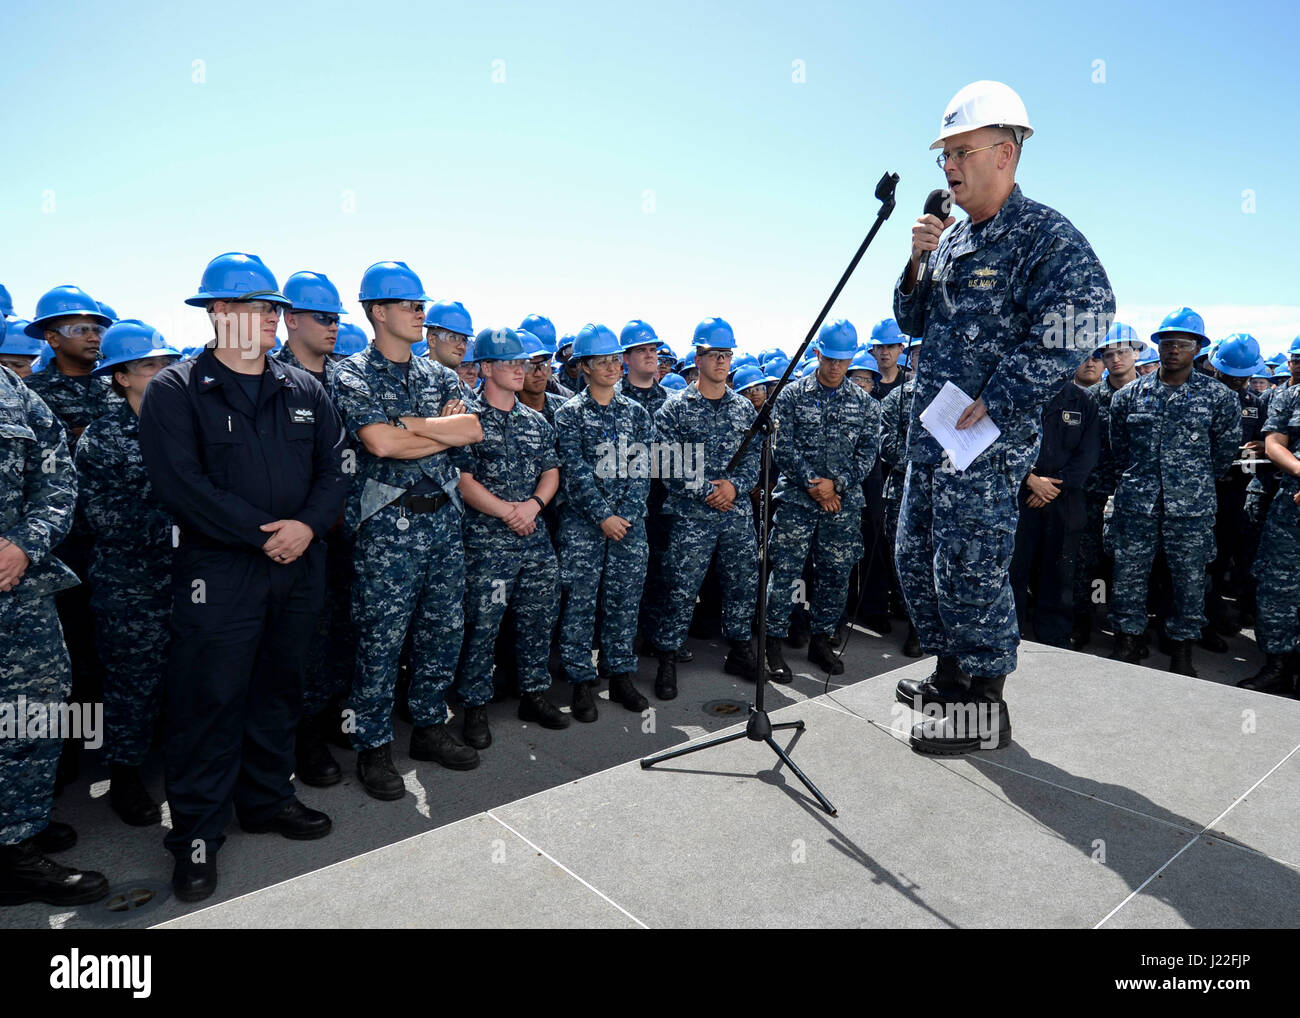 170413-N-UG095-049 SAN DIEGO (April 13, 2017) Capt. Benjamin Allbritton, commanding officer aboard amphibious assault ship USS Boxer (LHD 4), speaks Sailors on the flight deck during an all-hands call for E-6 and below. Boxer is currently in its homeport undergoing a phased maintenance availability. (U.S. Navy photo by Mass Communication Specialist 3rd Class Michael T. Eckelbecker/Released) Stock Photo